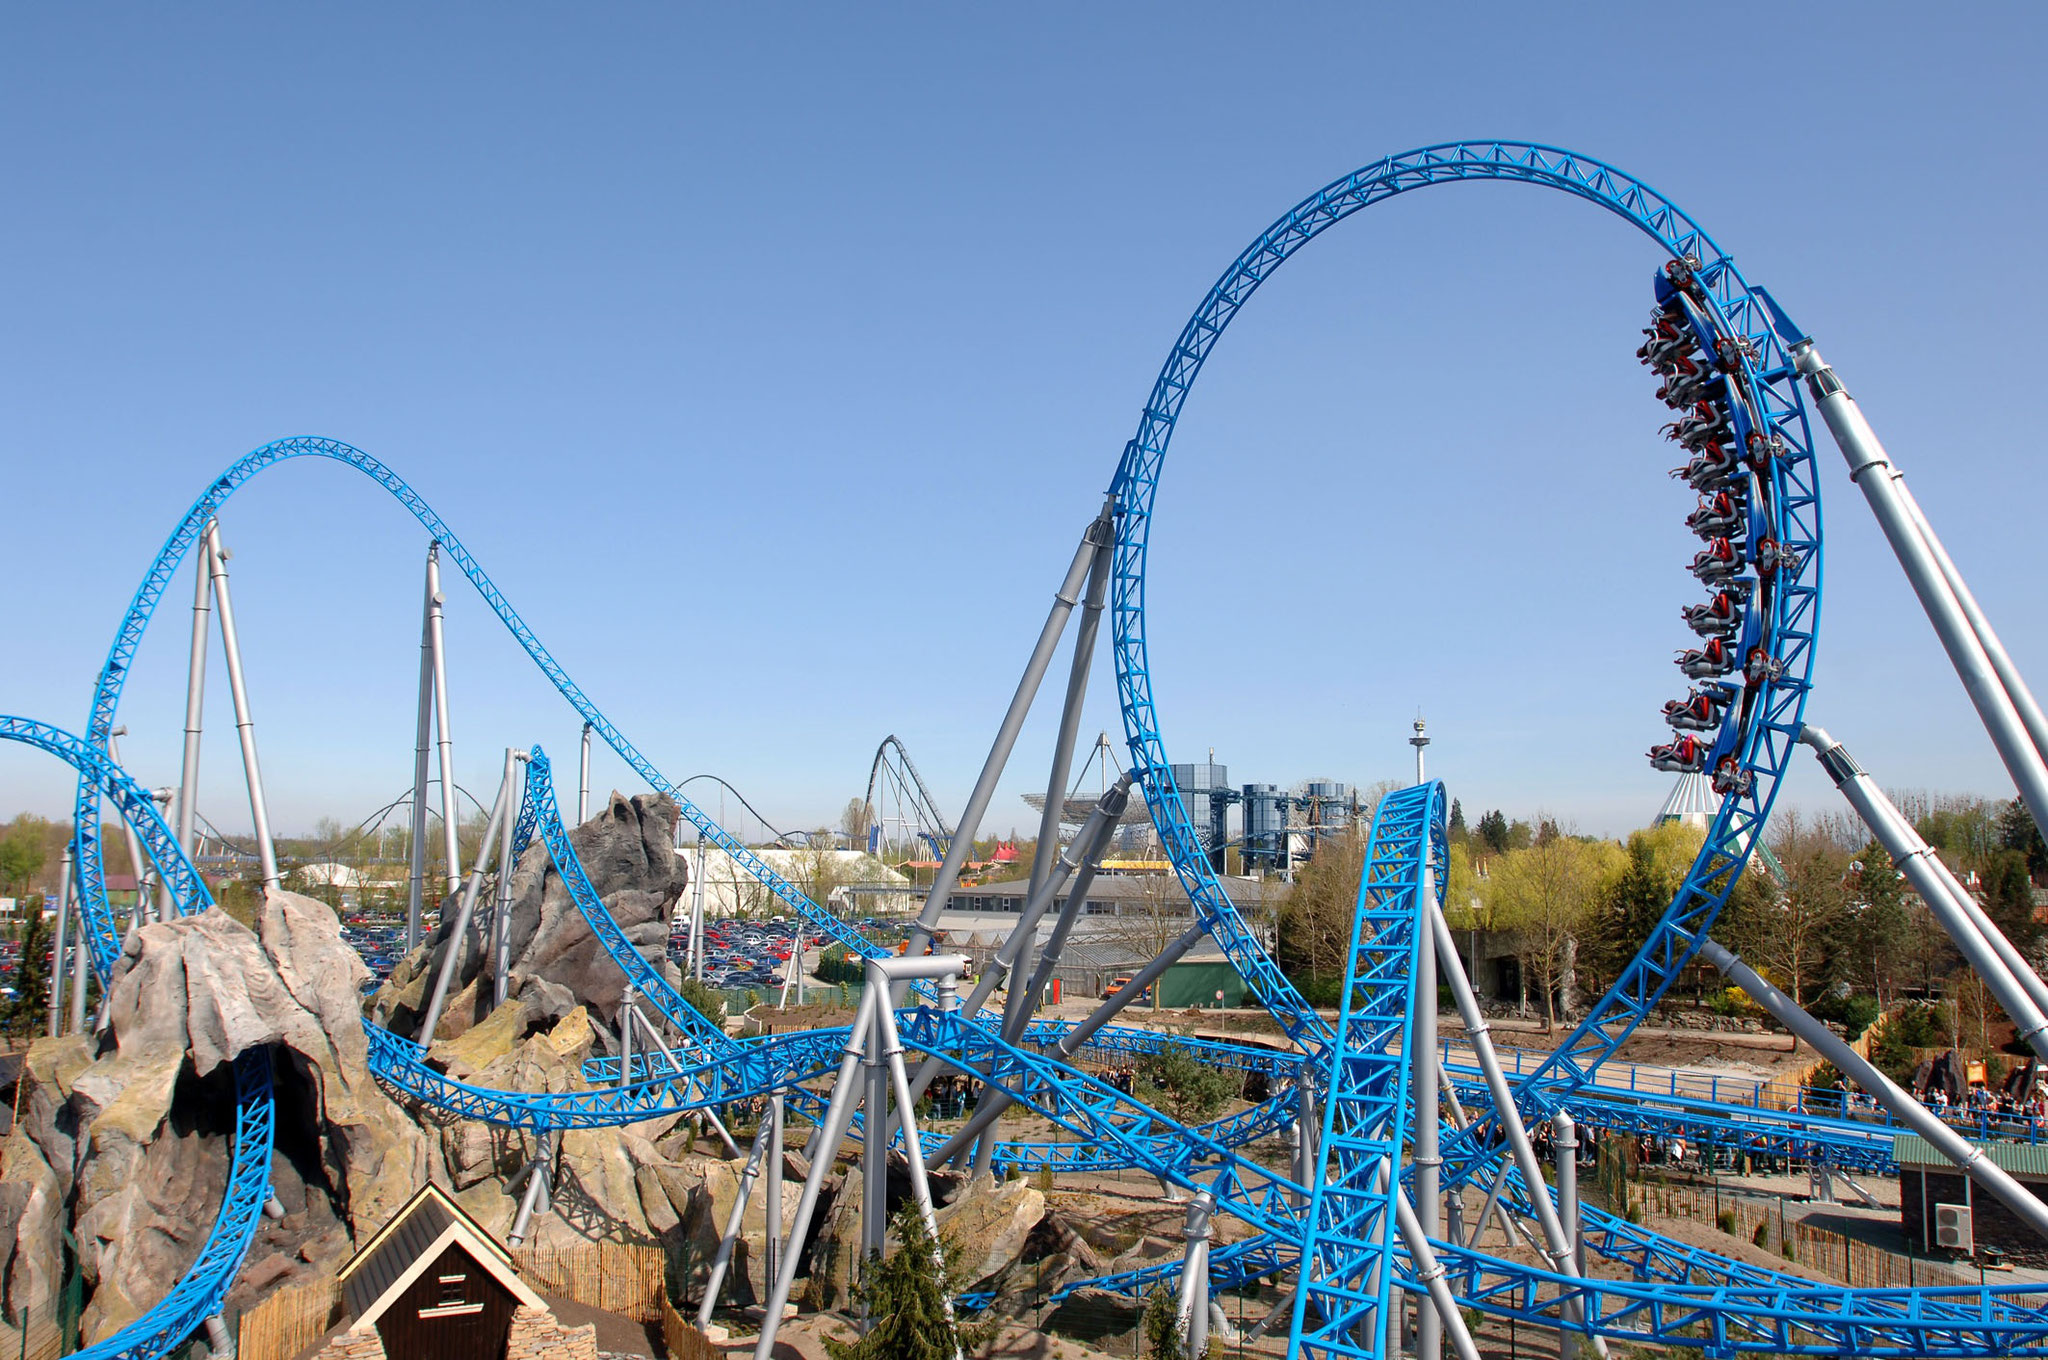 "Blue Fire" rollercoaster at Europa-Park Rust with it´s catapult start from 0 up to 100km/h in 2,5s!